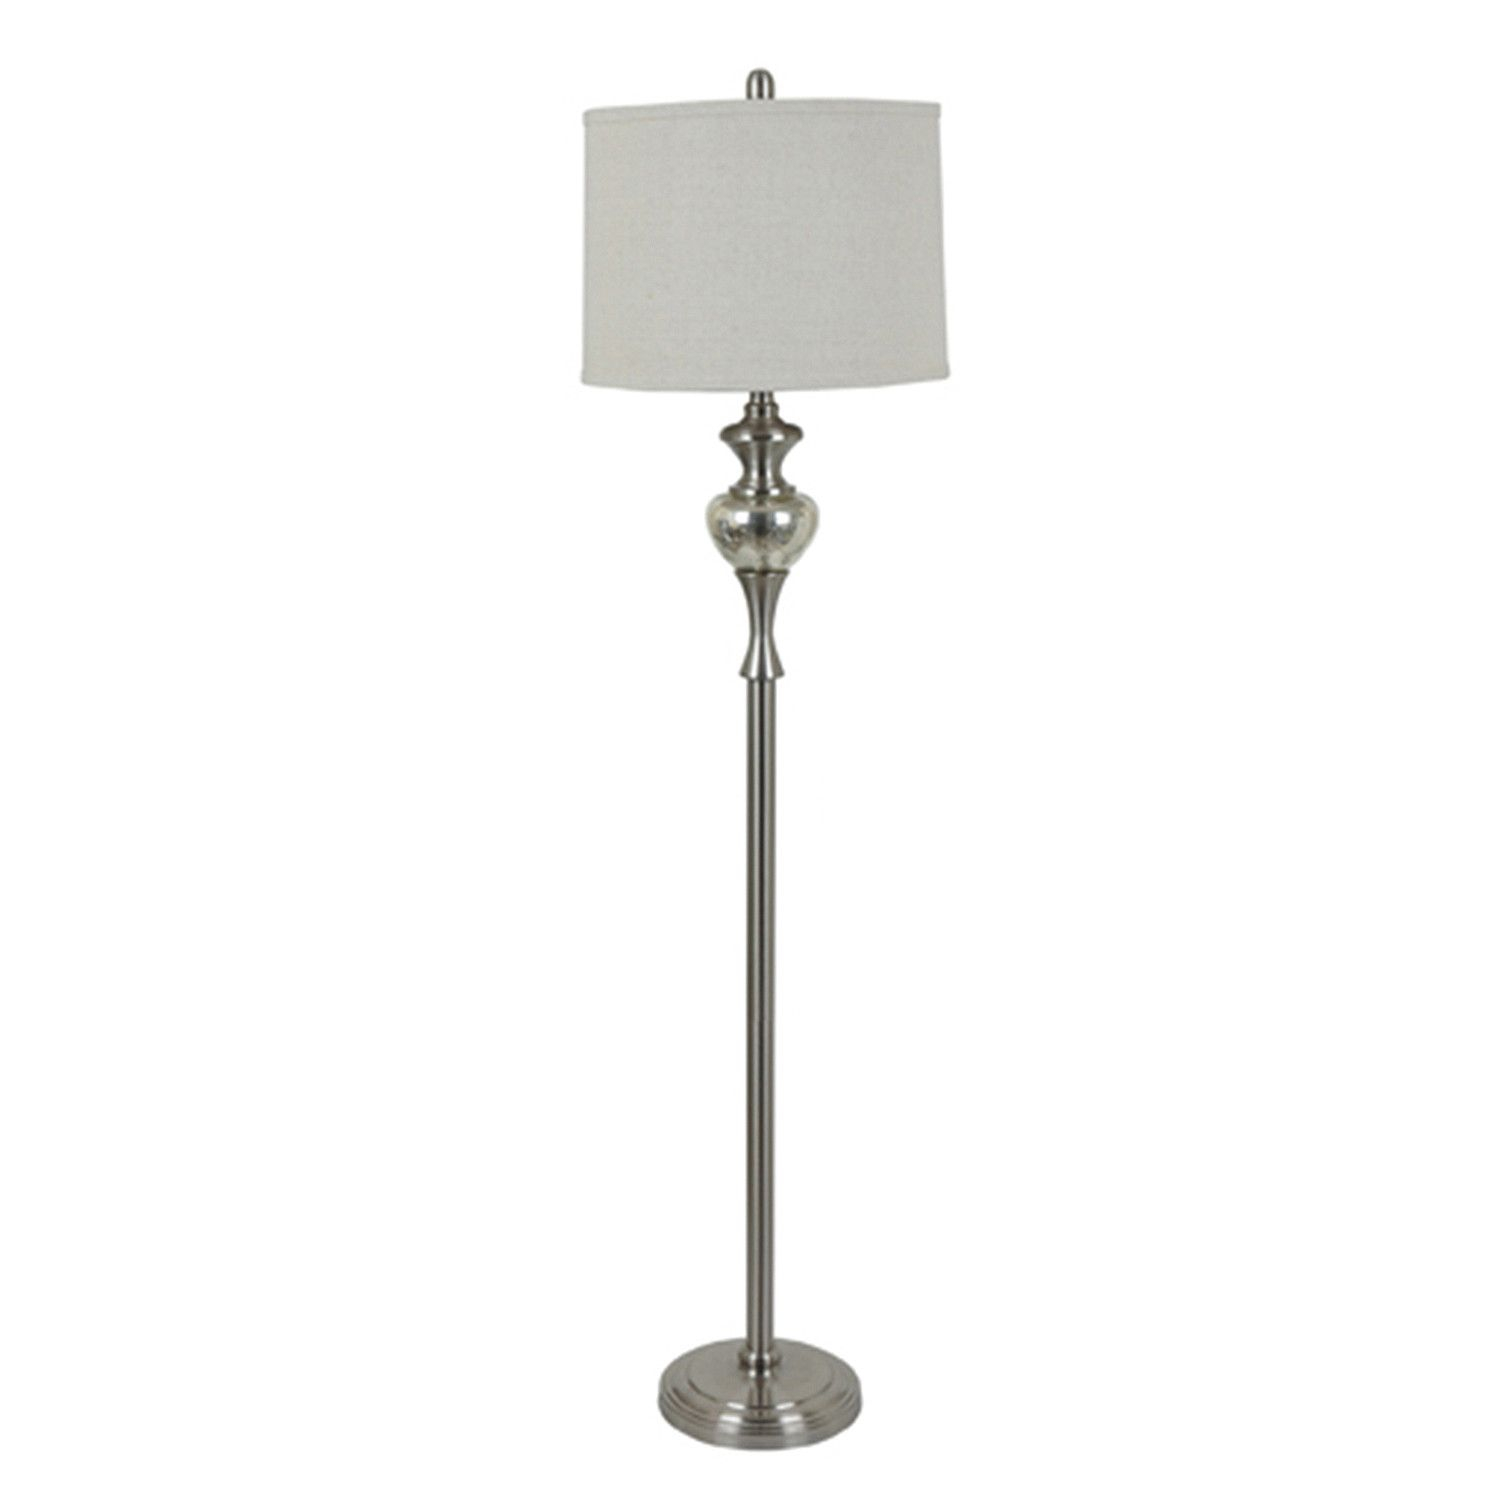 Mendes 58 Floor Lamp Home Inspiration Floor Lamp in sizing 1500 X 1500